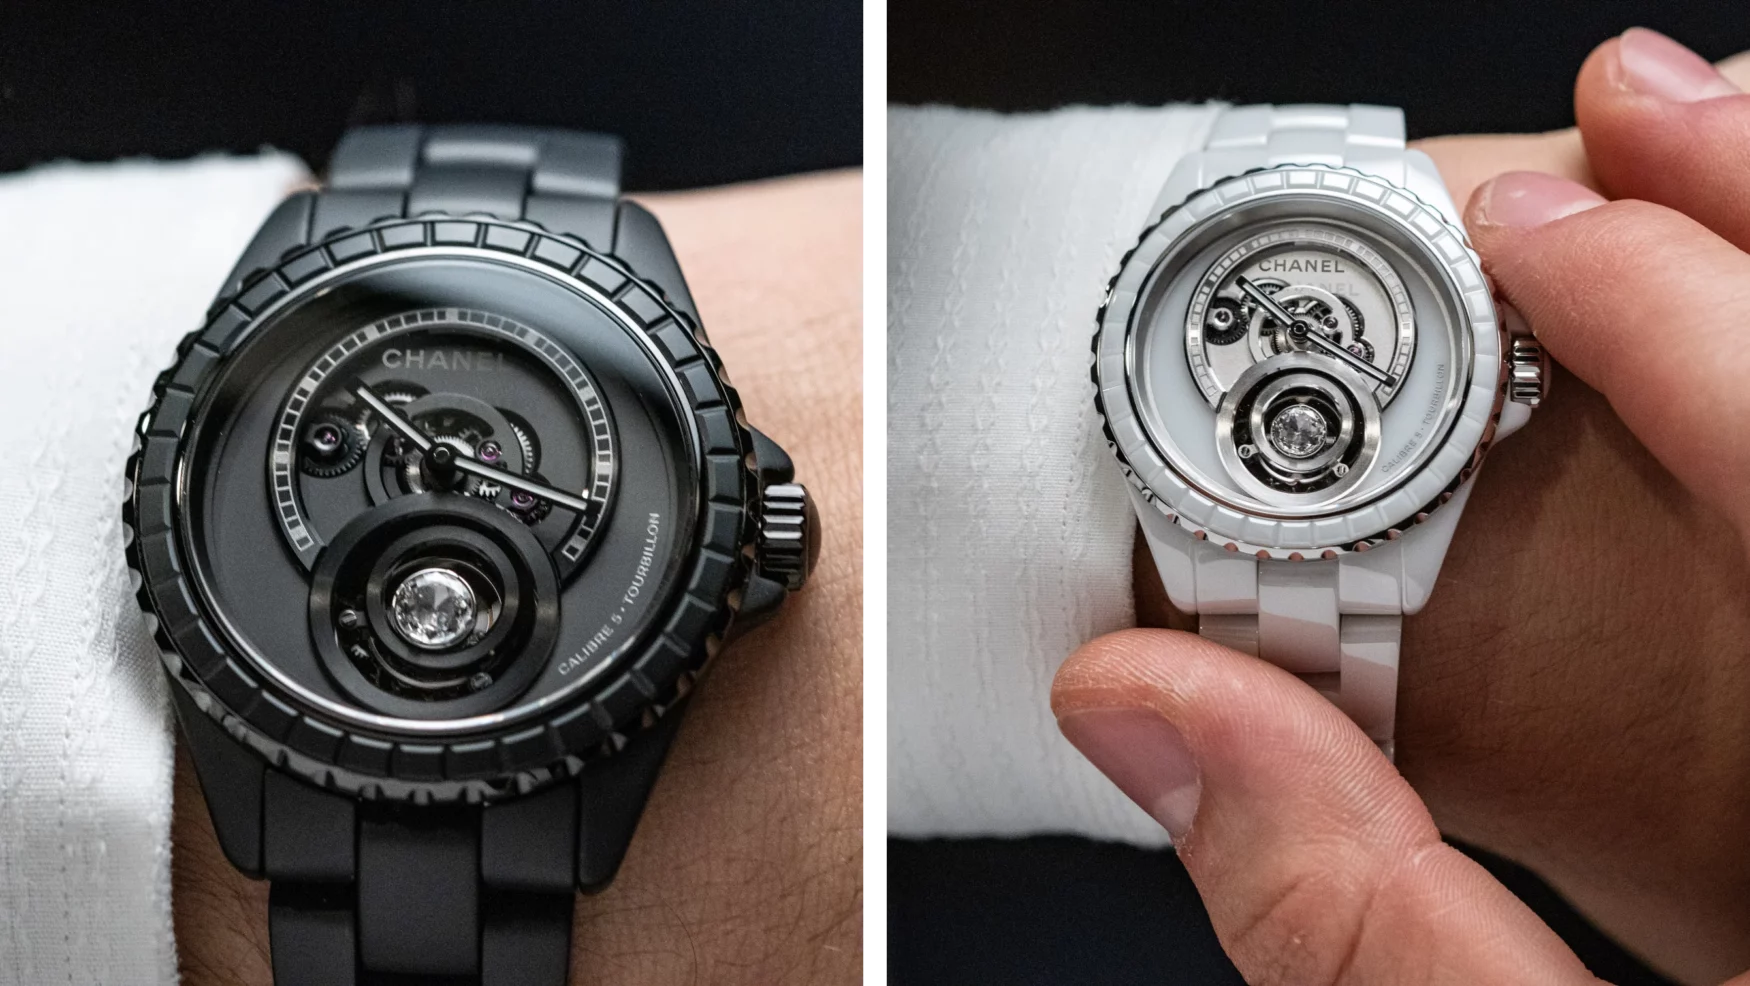 The Chanel J12 Diamond Tourbillon Calibre 5 is stealthy, glam and technical all at once